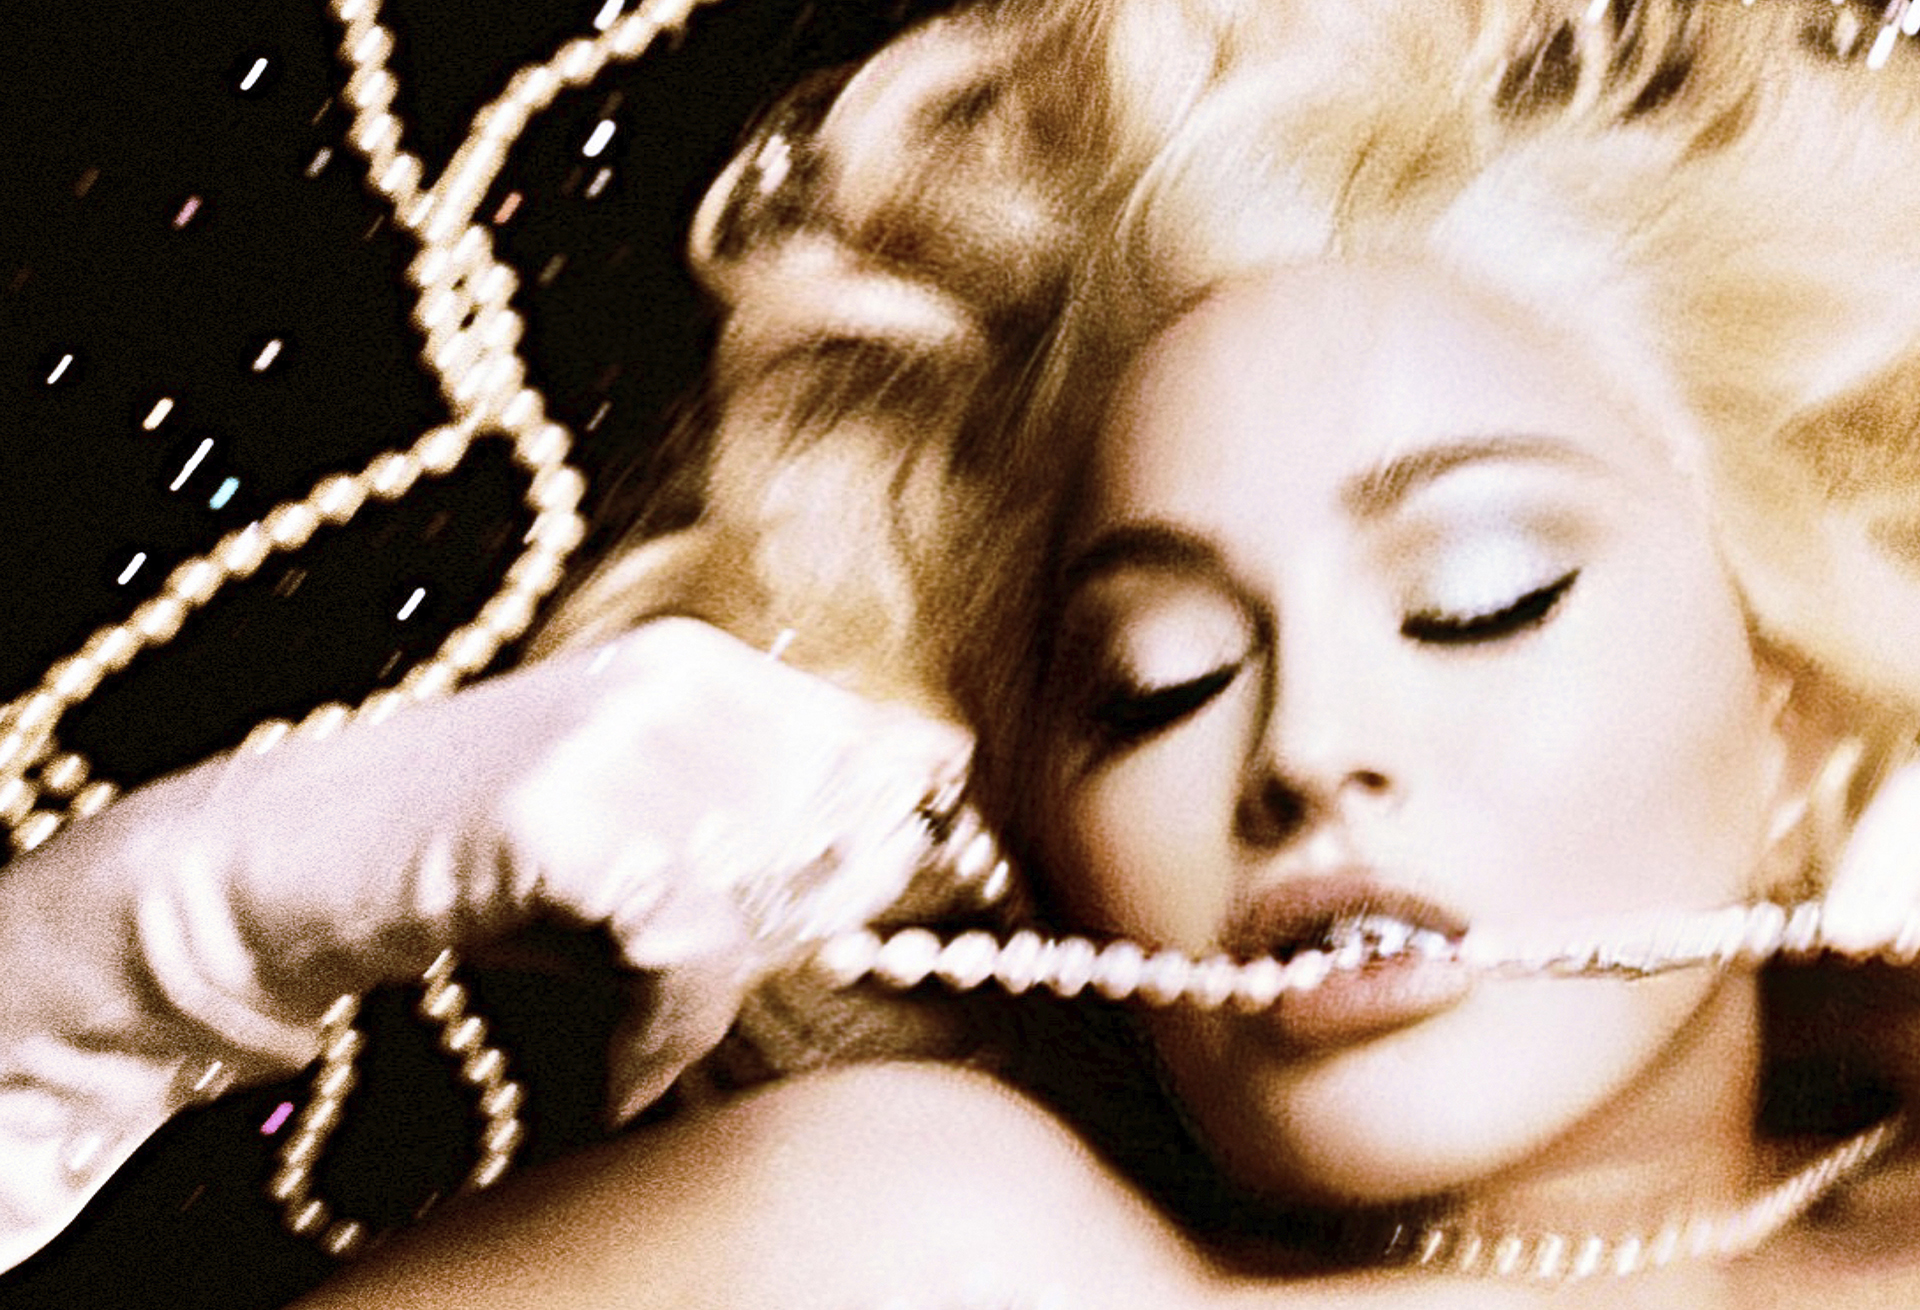  Pearl necklaces stylist’s own, Rings archival Neil Lane, Madonna’s own, Gloves Carolina Amato